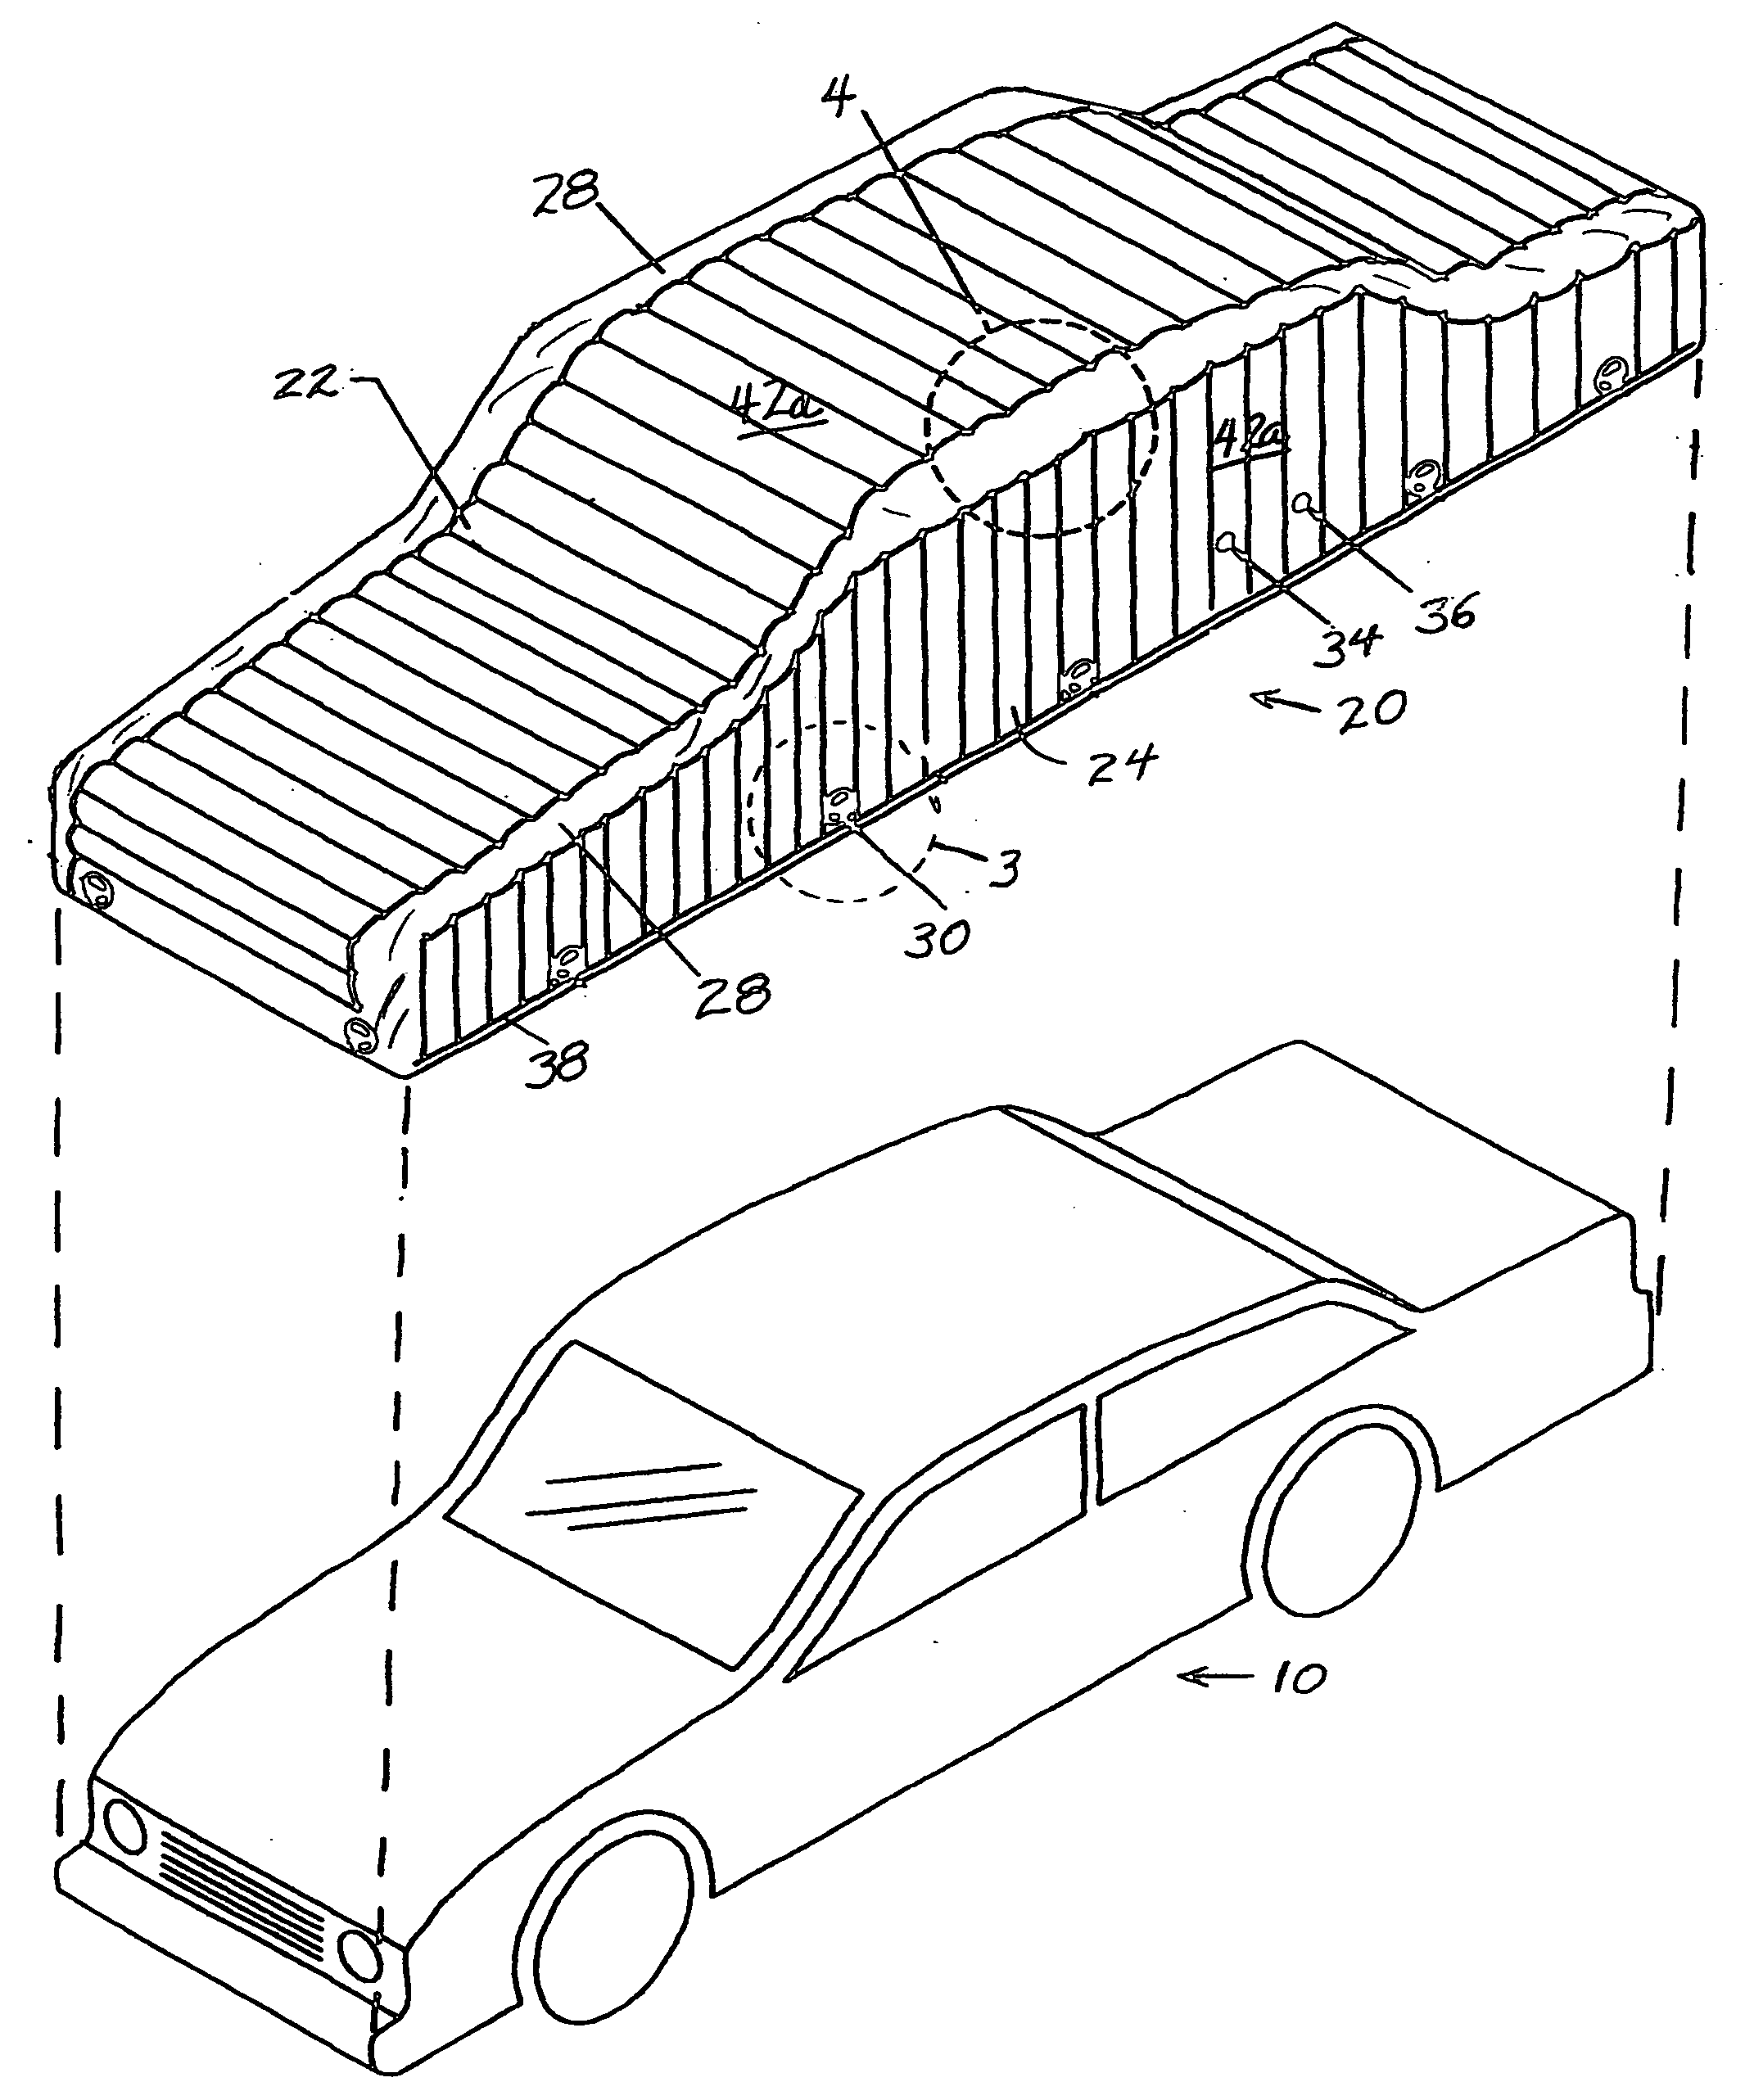 Protective vehicle cover and method of use